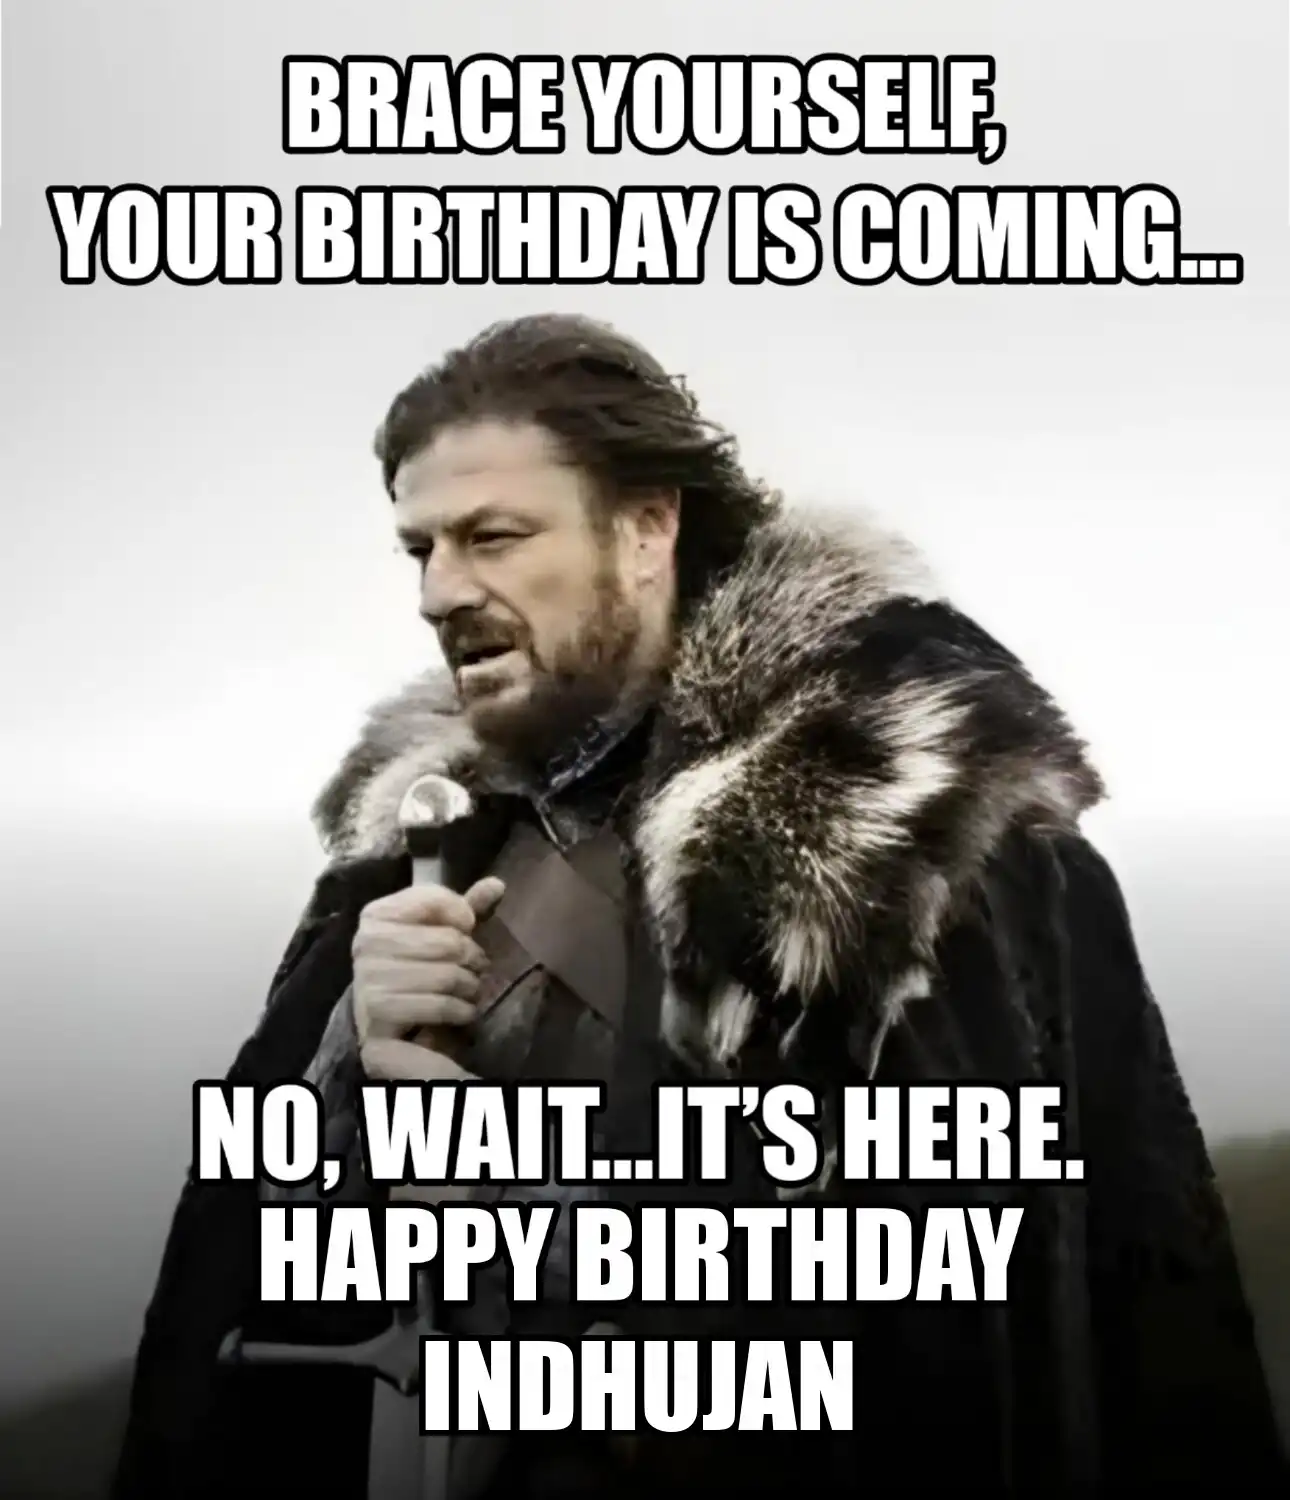 Happy Birthday Indhujan Brace Yourself Your Birthday Is Coming Meme